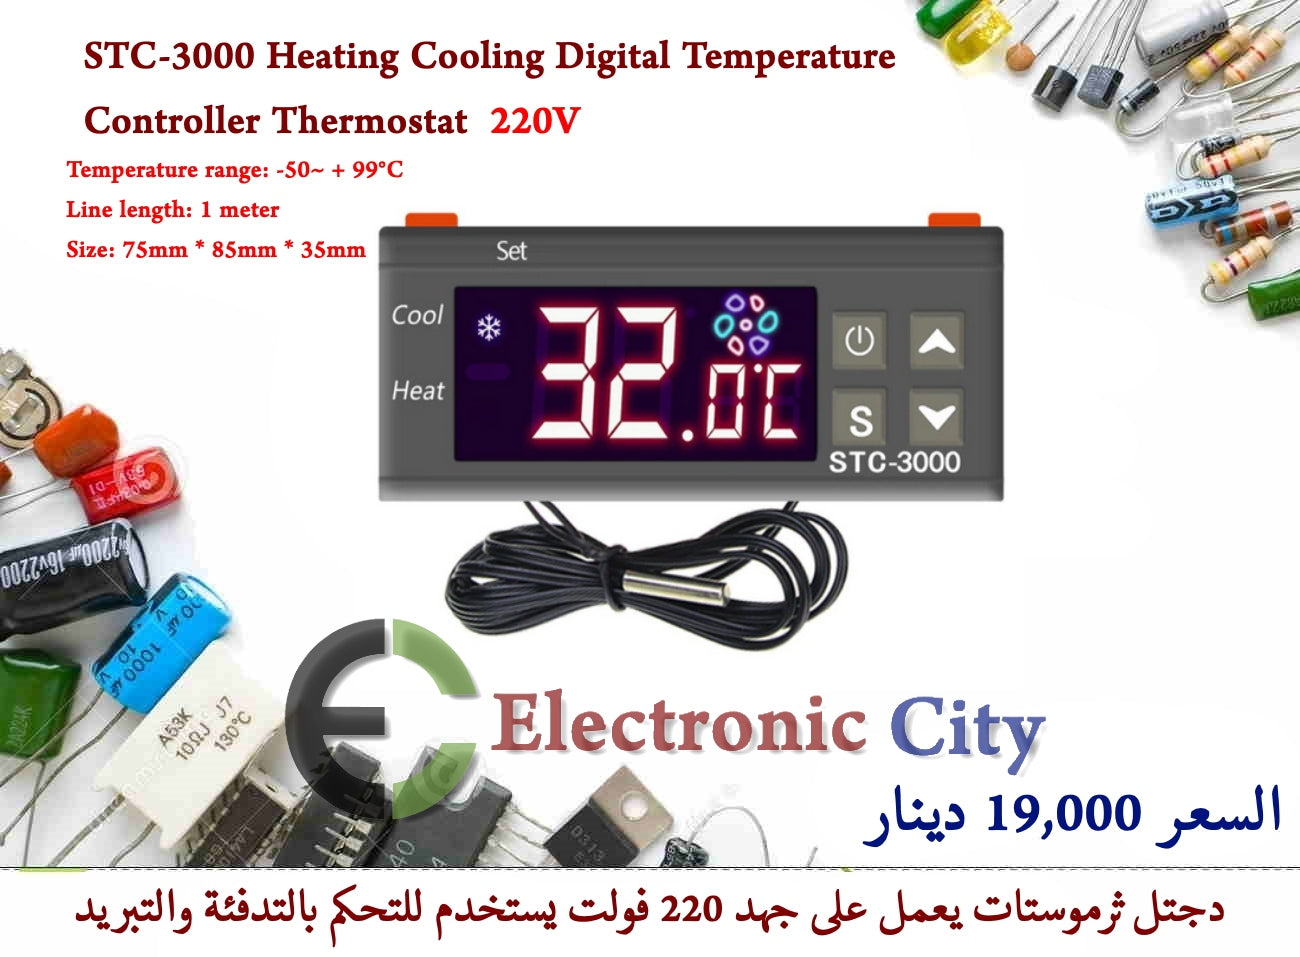 STC-3000 220V Heating Cooling Digital Temperature Controller Thermostat